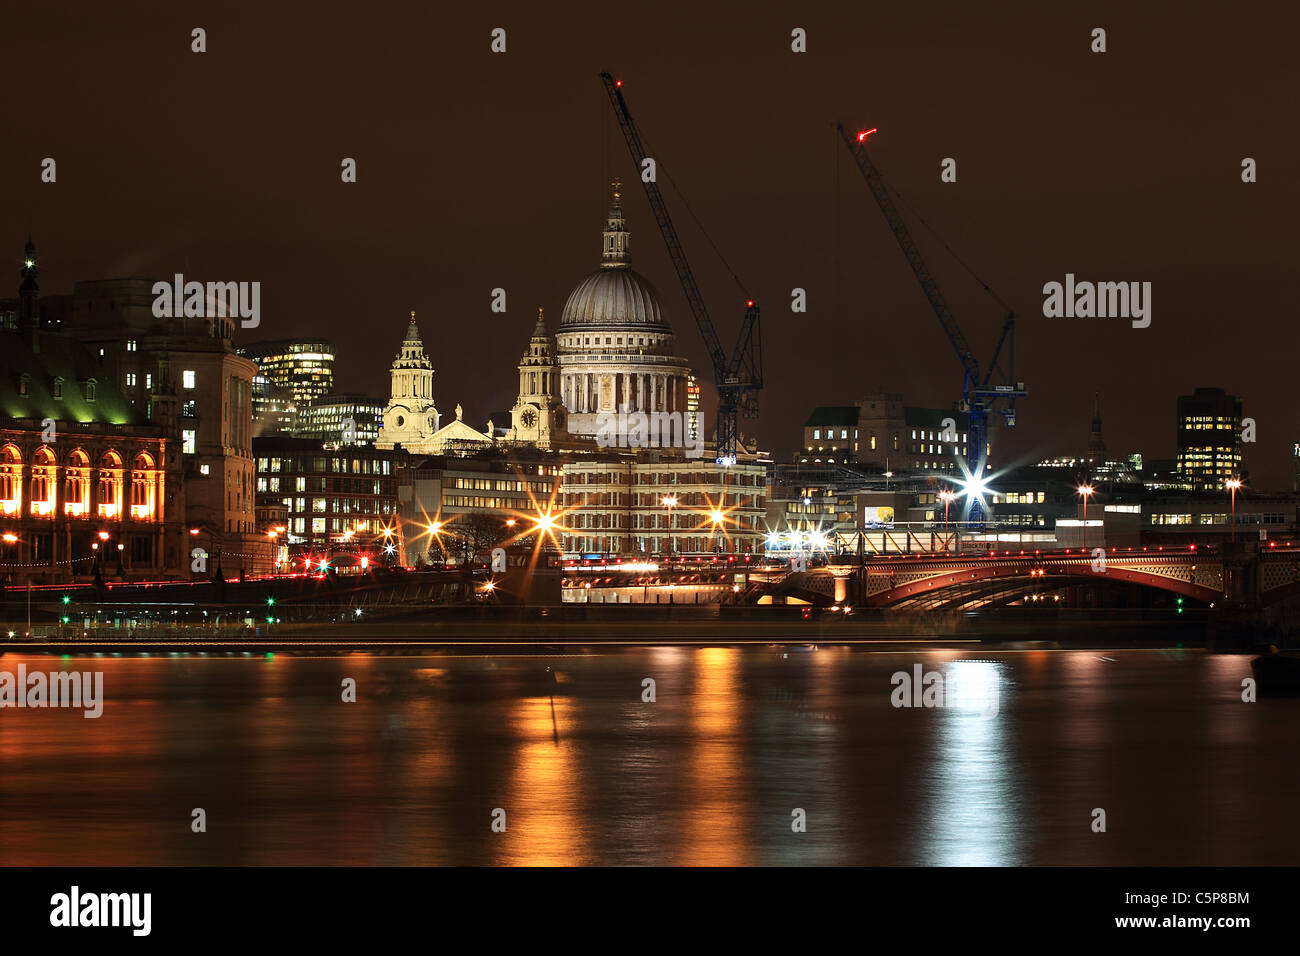 St Paul's Cathedral at night, view across the Thames, London, UK Stock Photo